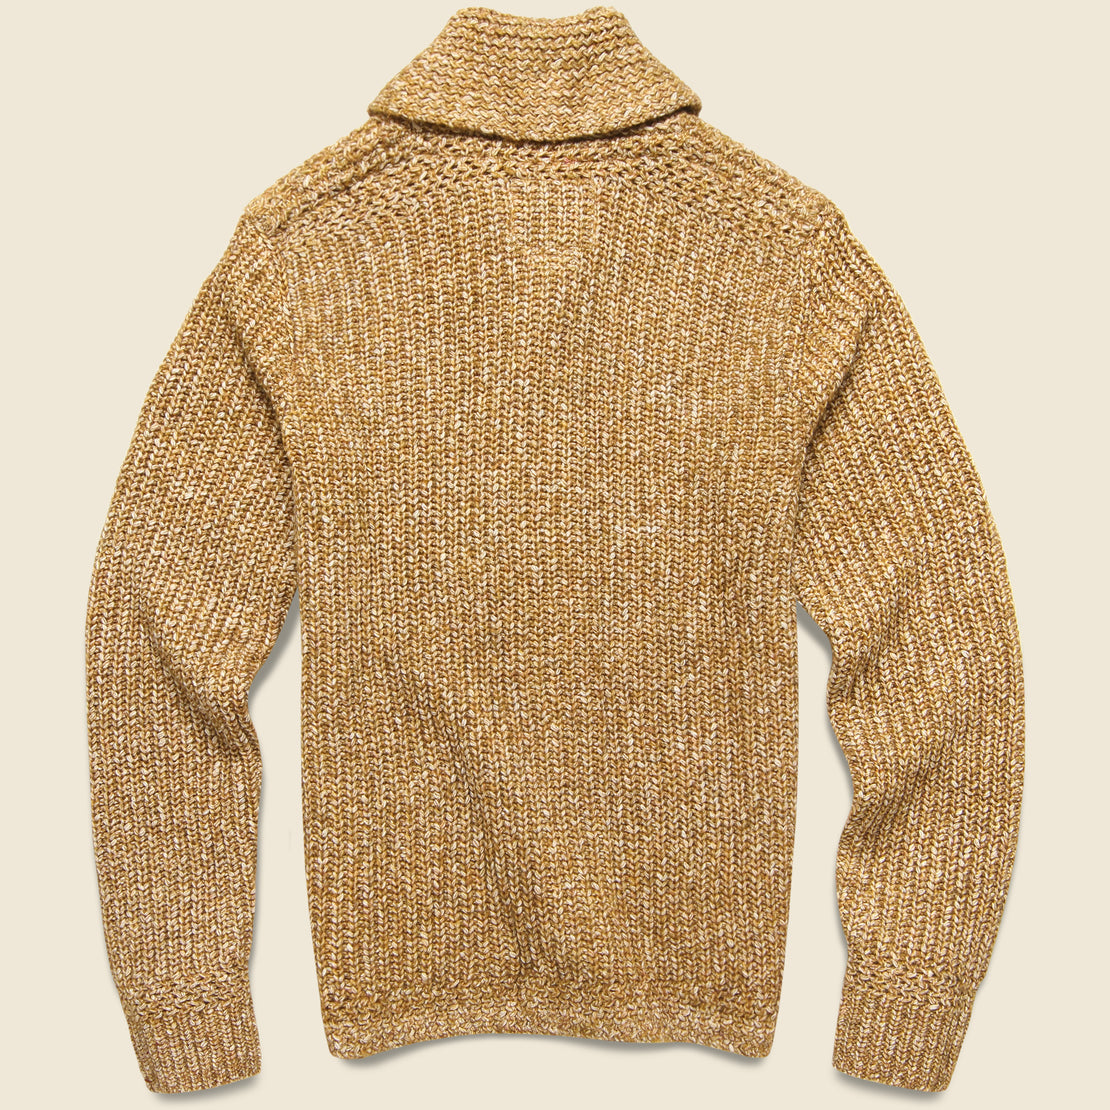 Bradford Shawl Cardigan - Biscuit - Grayers - STAG Provisions - Tops - Sweater